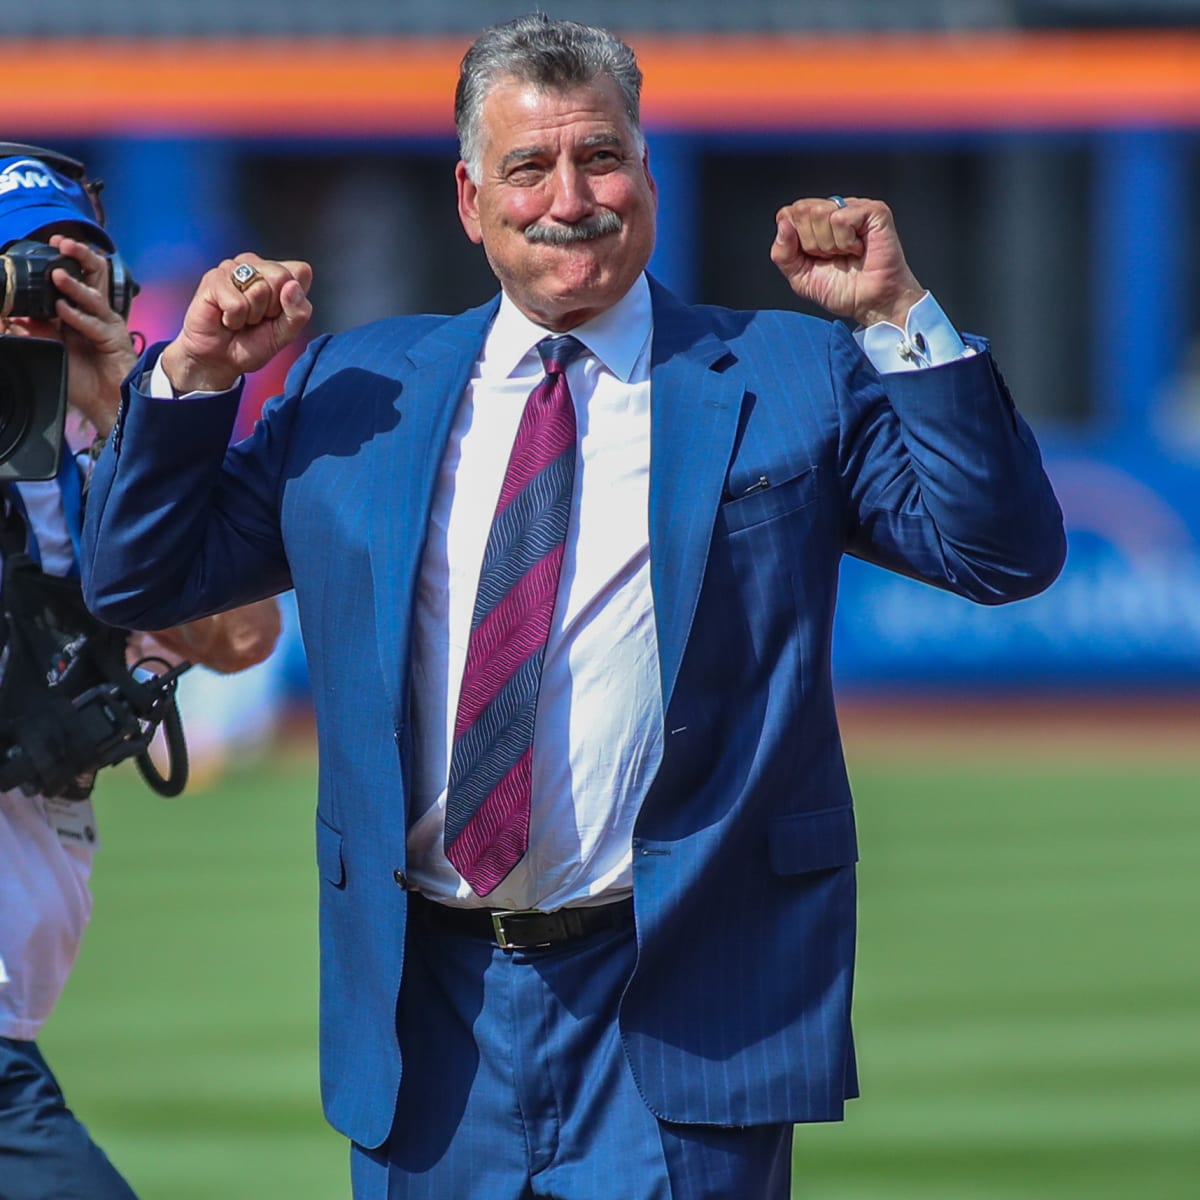 Does Former New York Mets First Baseman Keith Hernandez Deserve to be in  Hall of Fame? - Sports Illustrated New York Mets News, Analysis and More